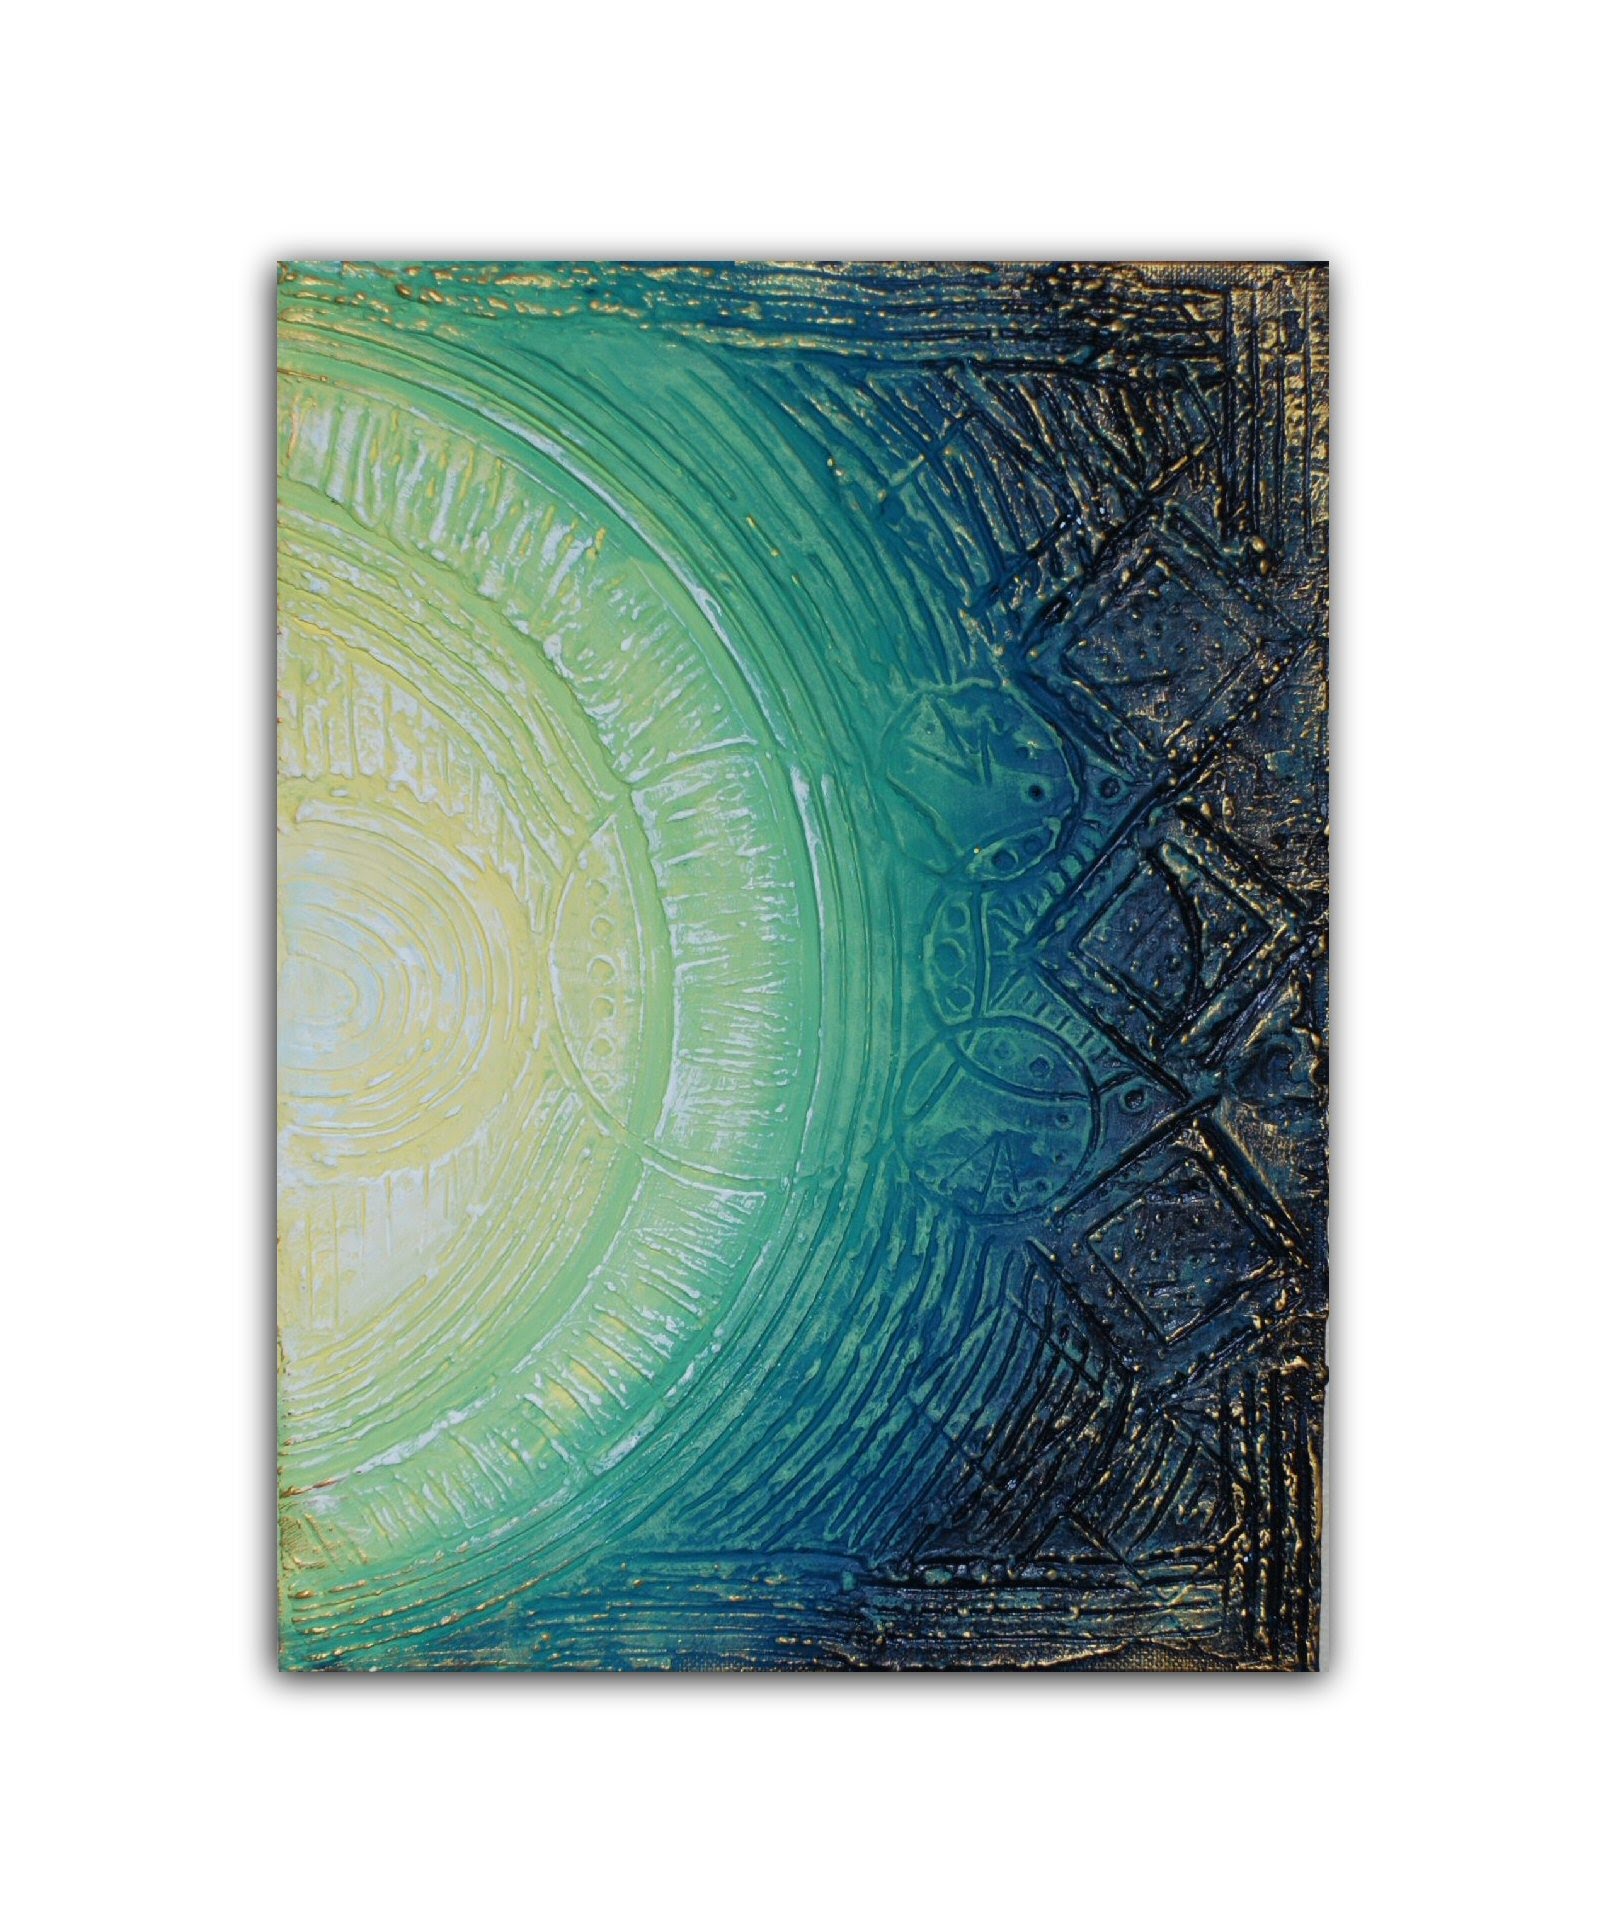 Textured Abstract Painting - 